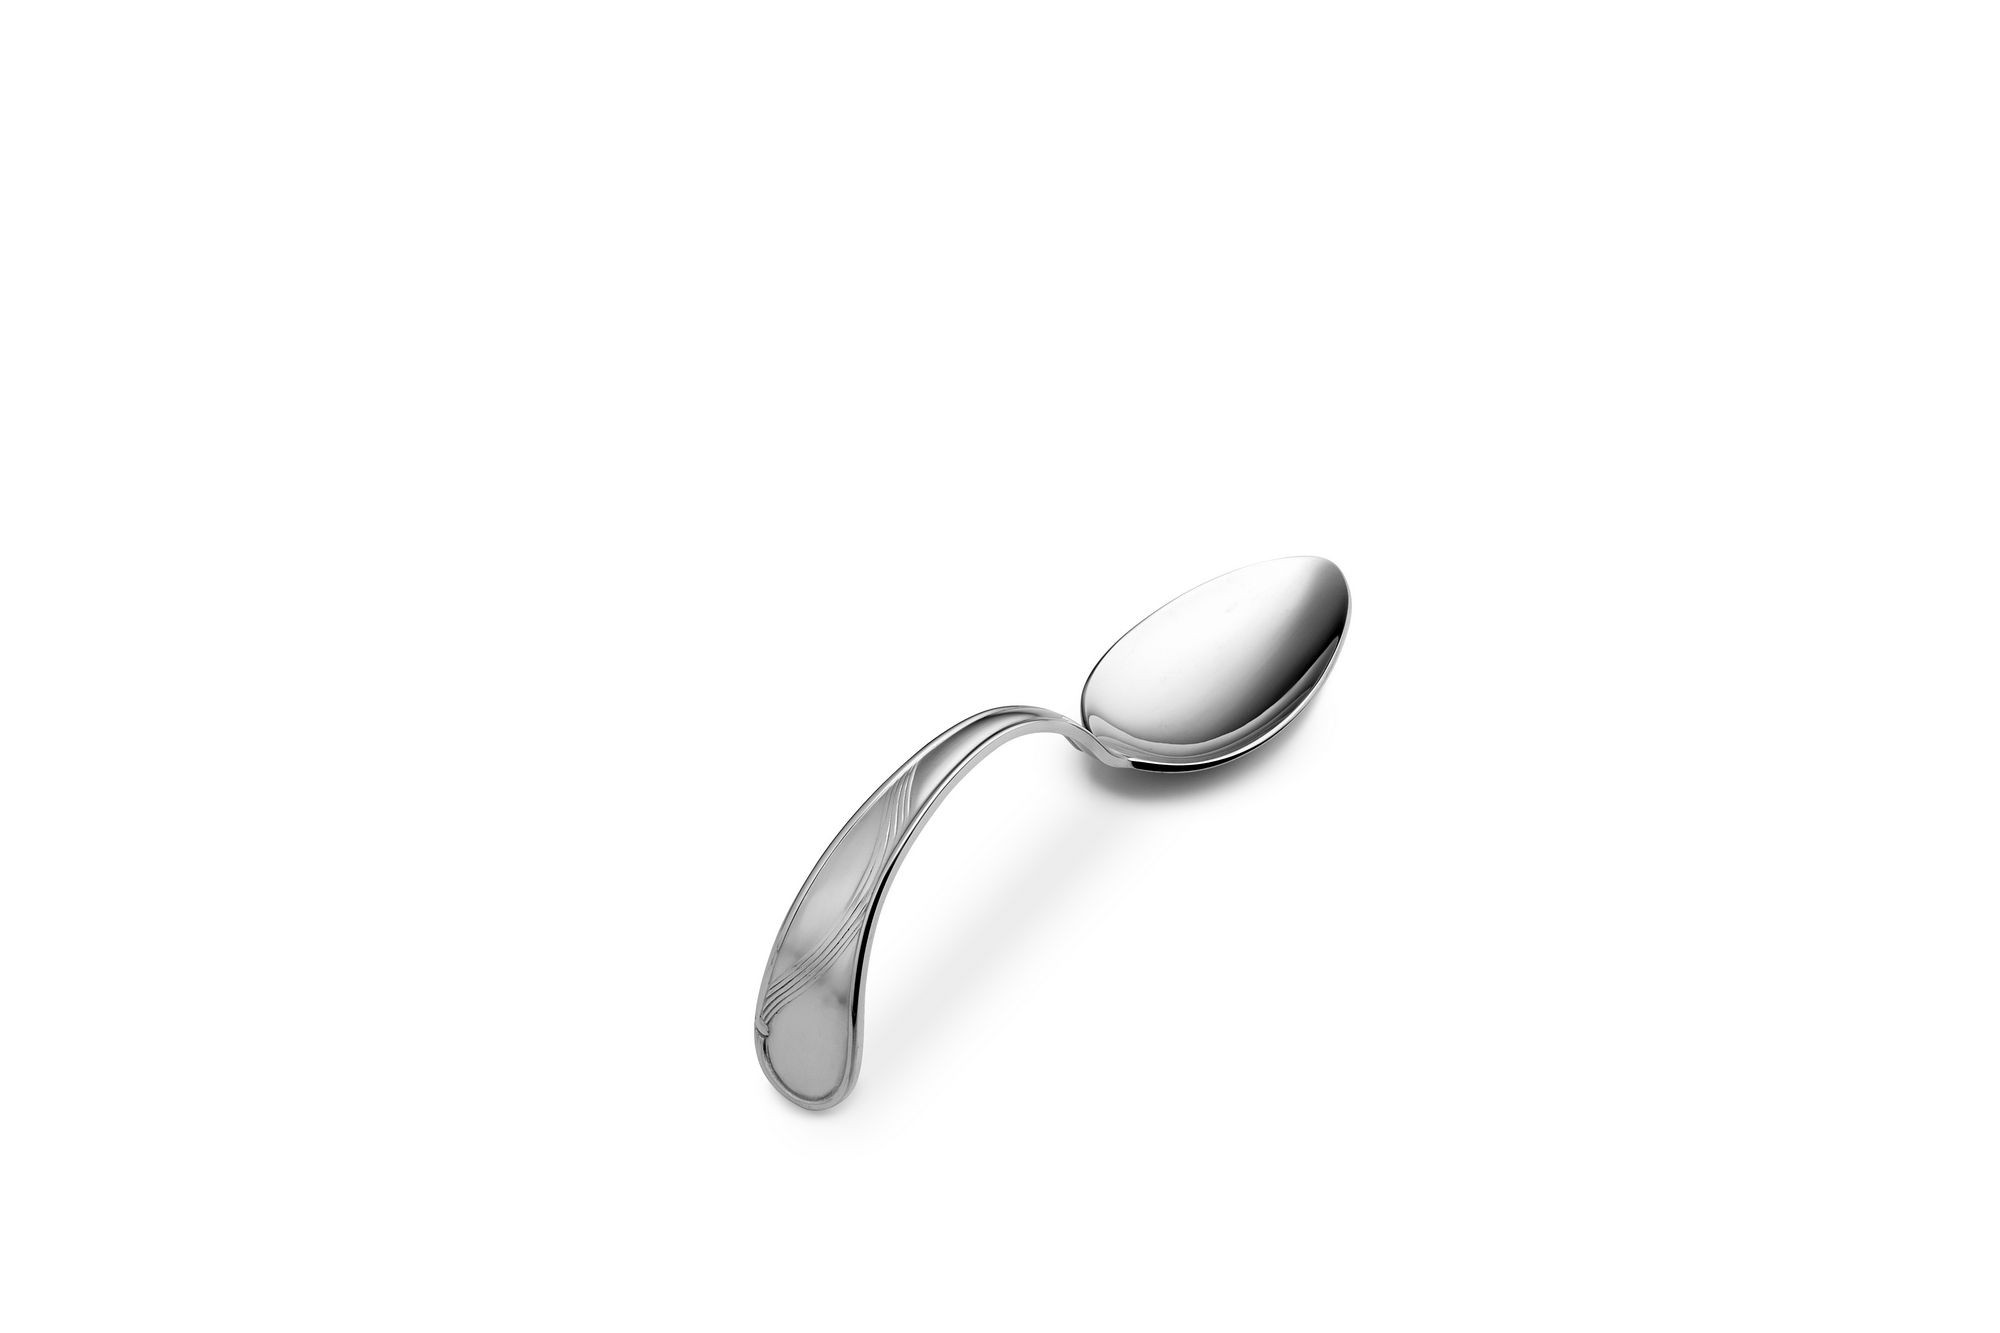 Bon Chef STS2203 Wave Soup and Dessert Tasting Spoon